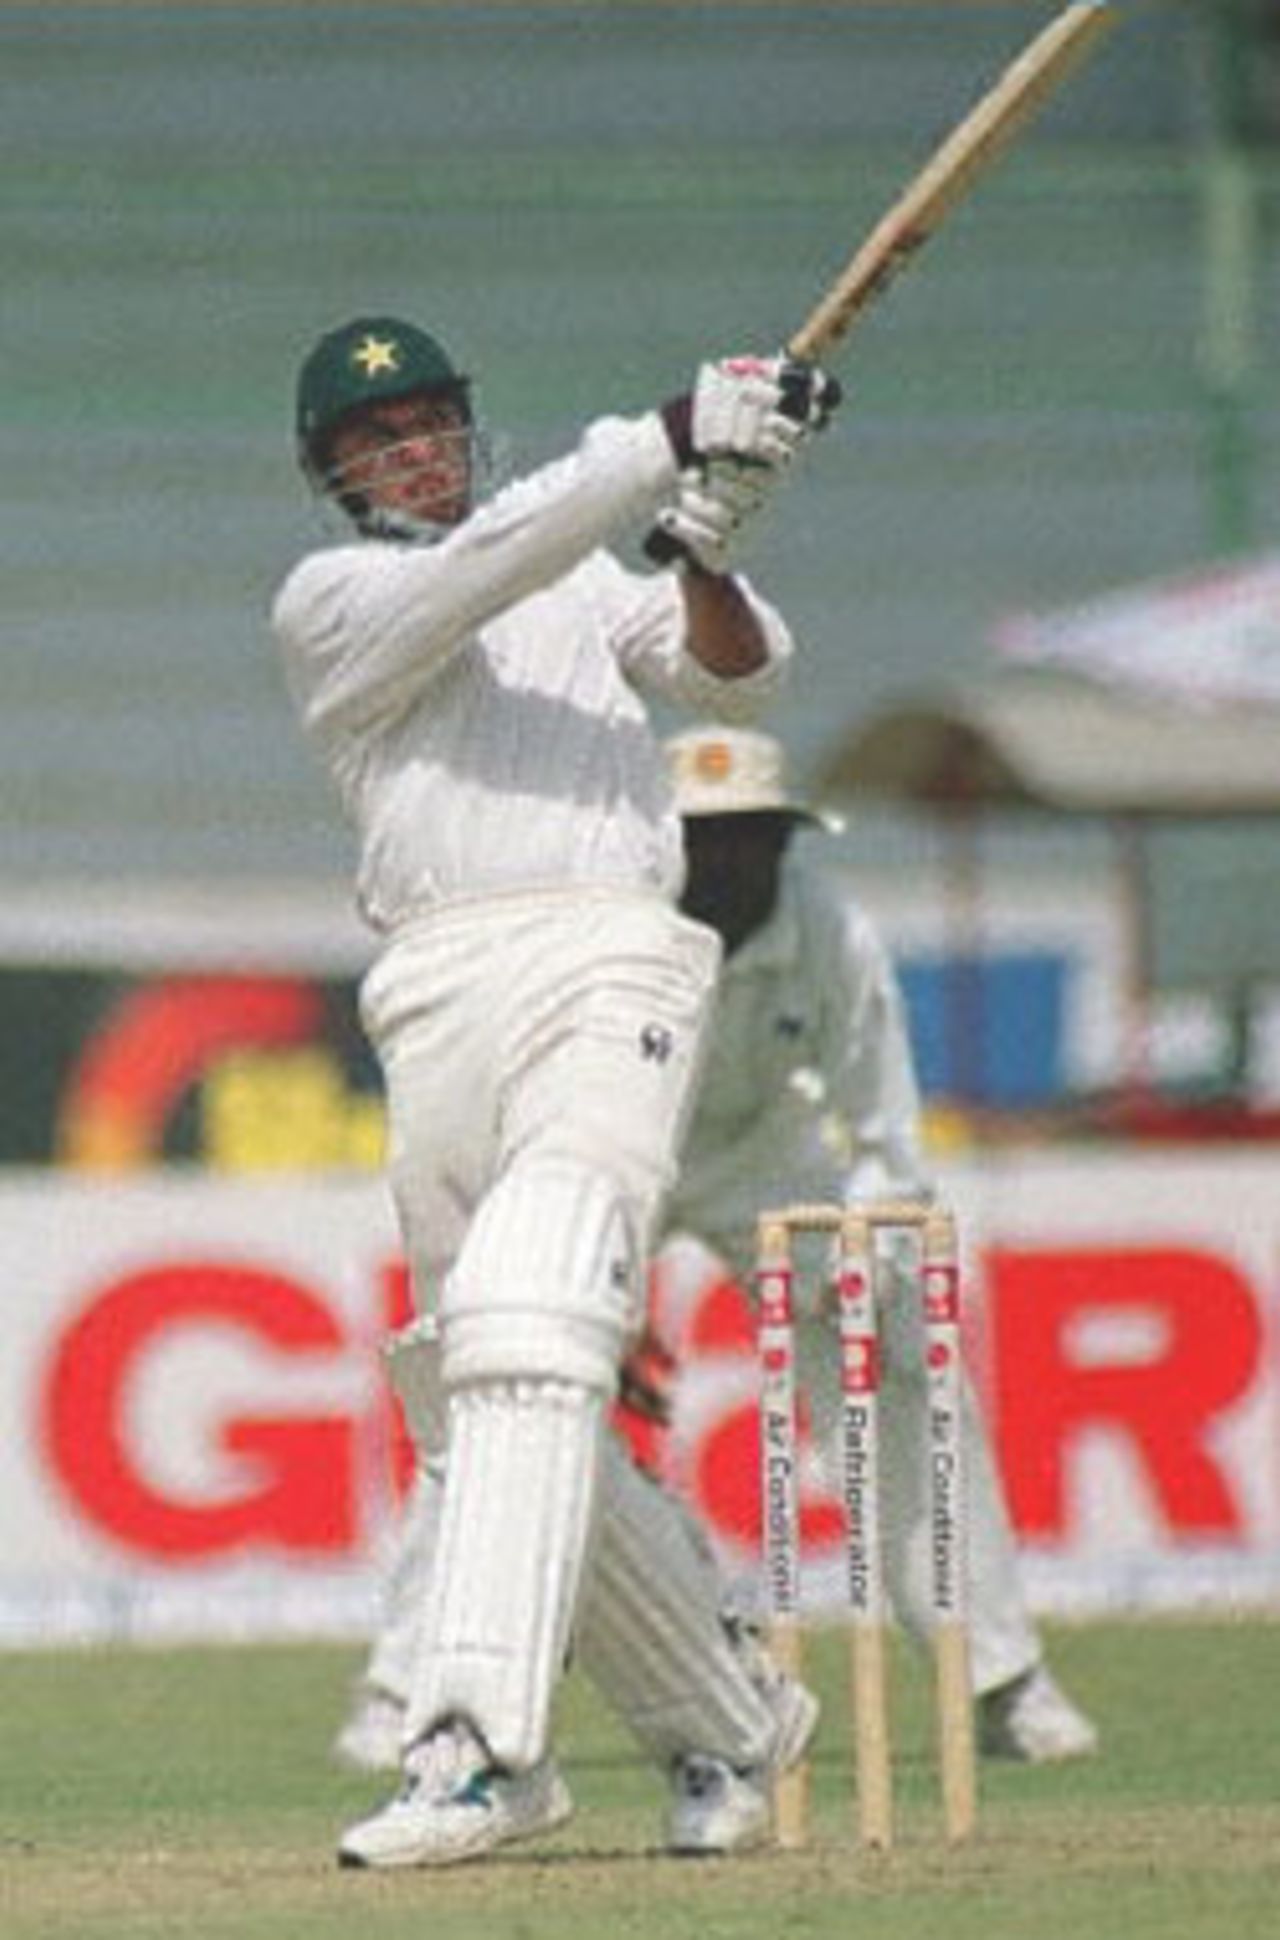 Pakistan opening batsman Shahid Afridi pulls a boundarv off Sri Lankan pacer Chaminda Vaas on the first day of the third and final cricket Test in Karachi, 12 March 2000. Pakistan were 164 runs for 6 wickets with Afridi making 74 runs.